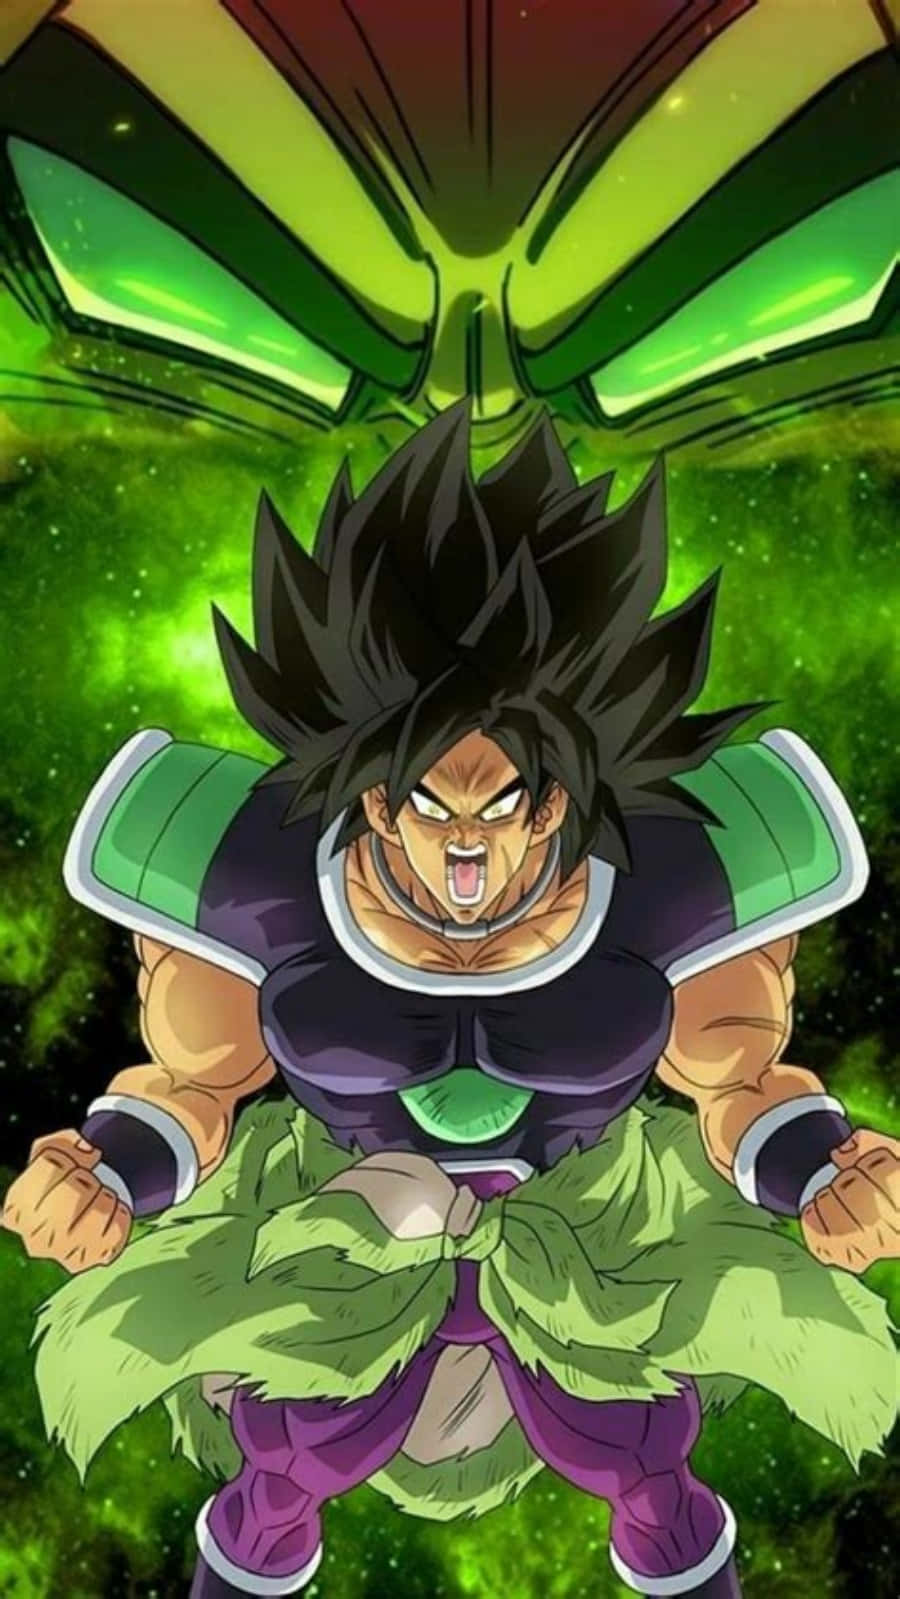 "Team up and fight against evil with the cast from Dragon Ball Super Broly!"